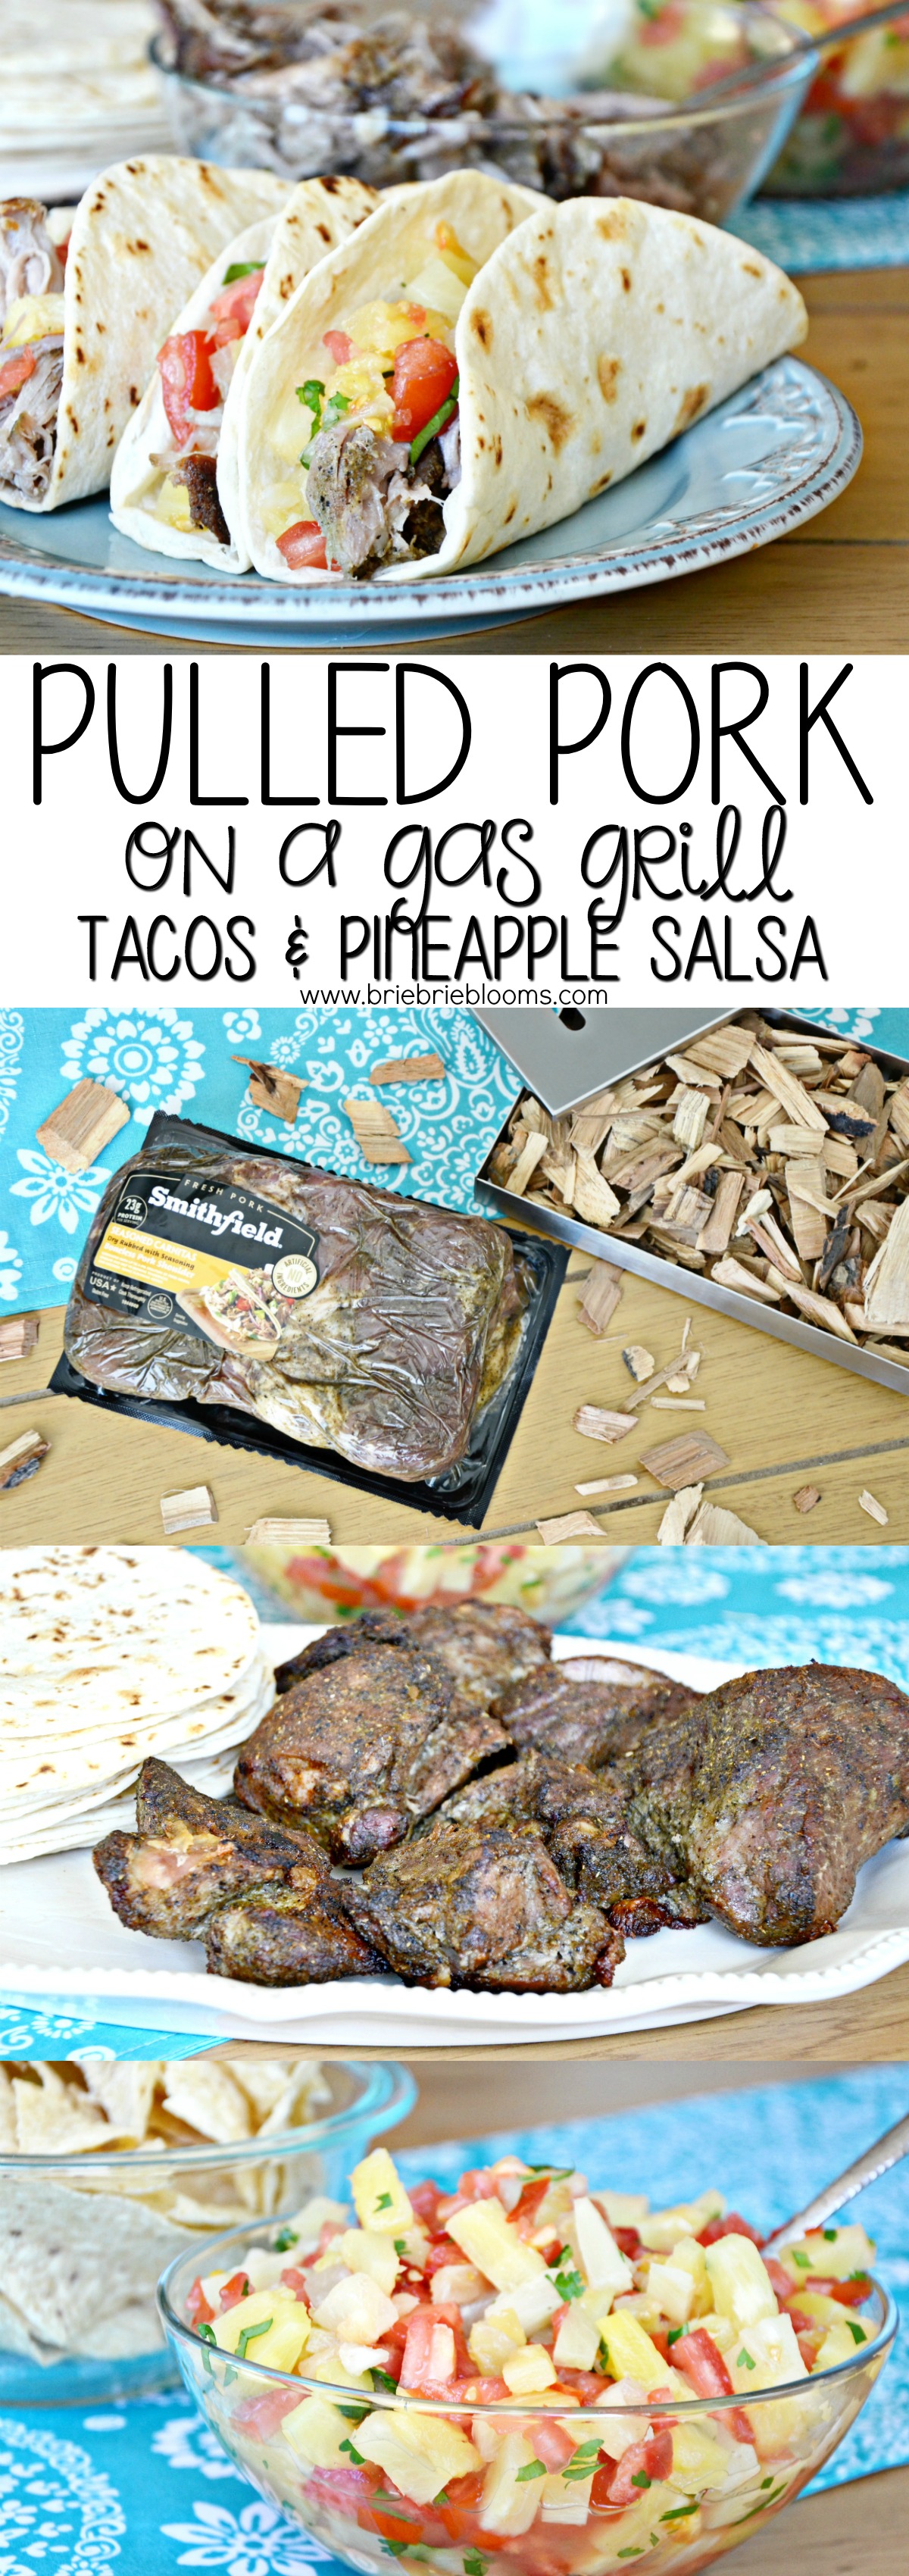 Easily make pulled pork on a gas grill for pork tacos and pineapple salsa.